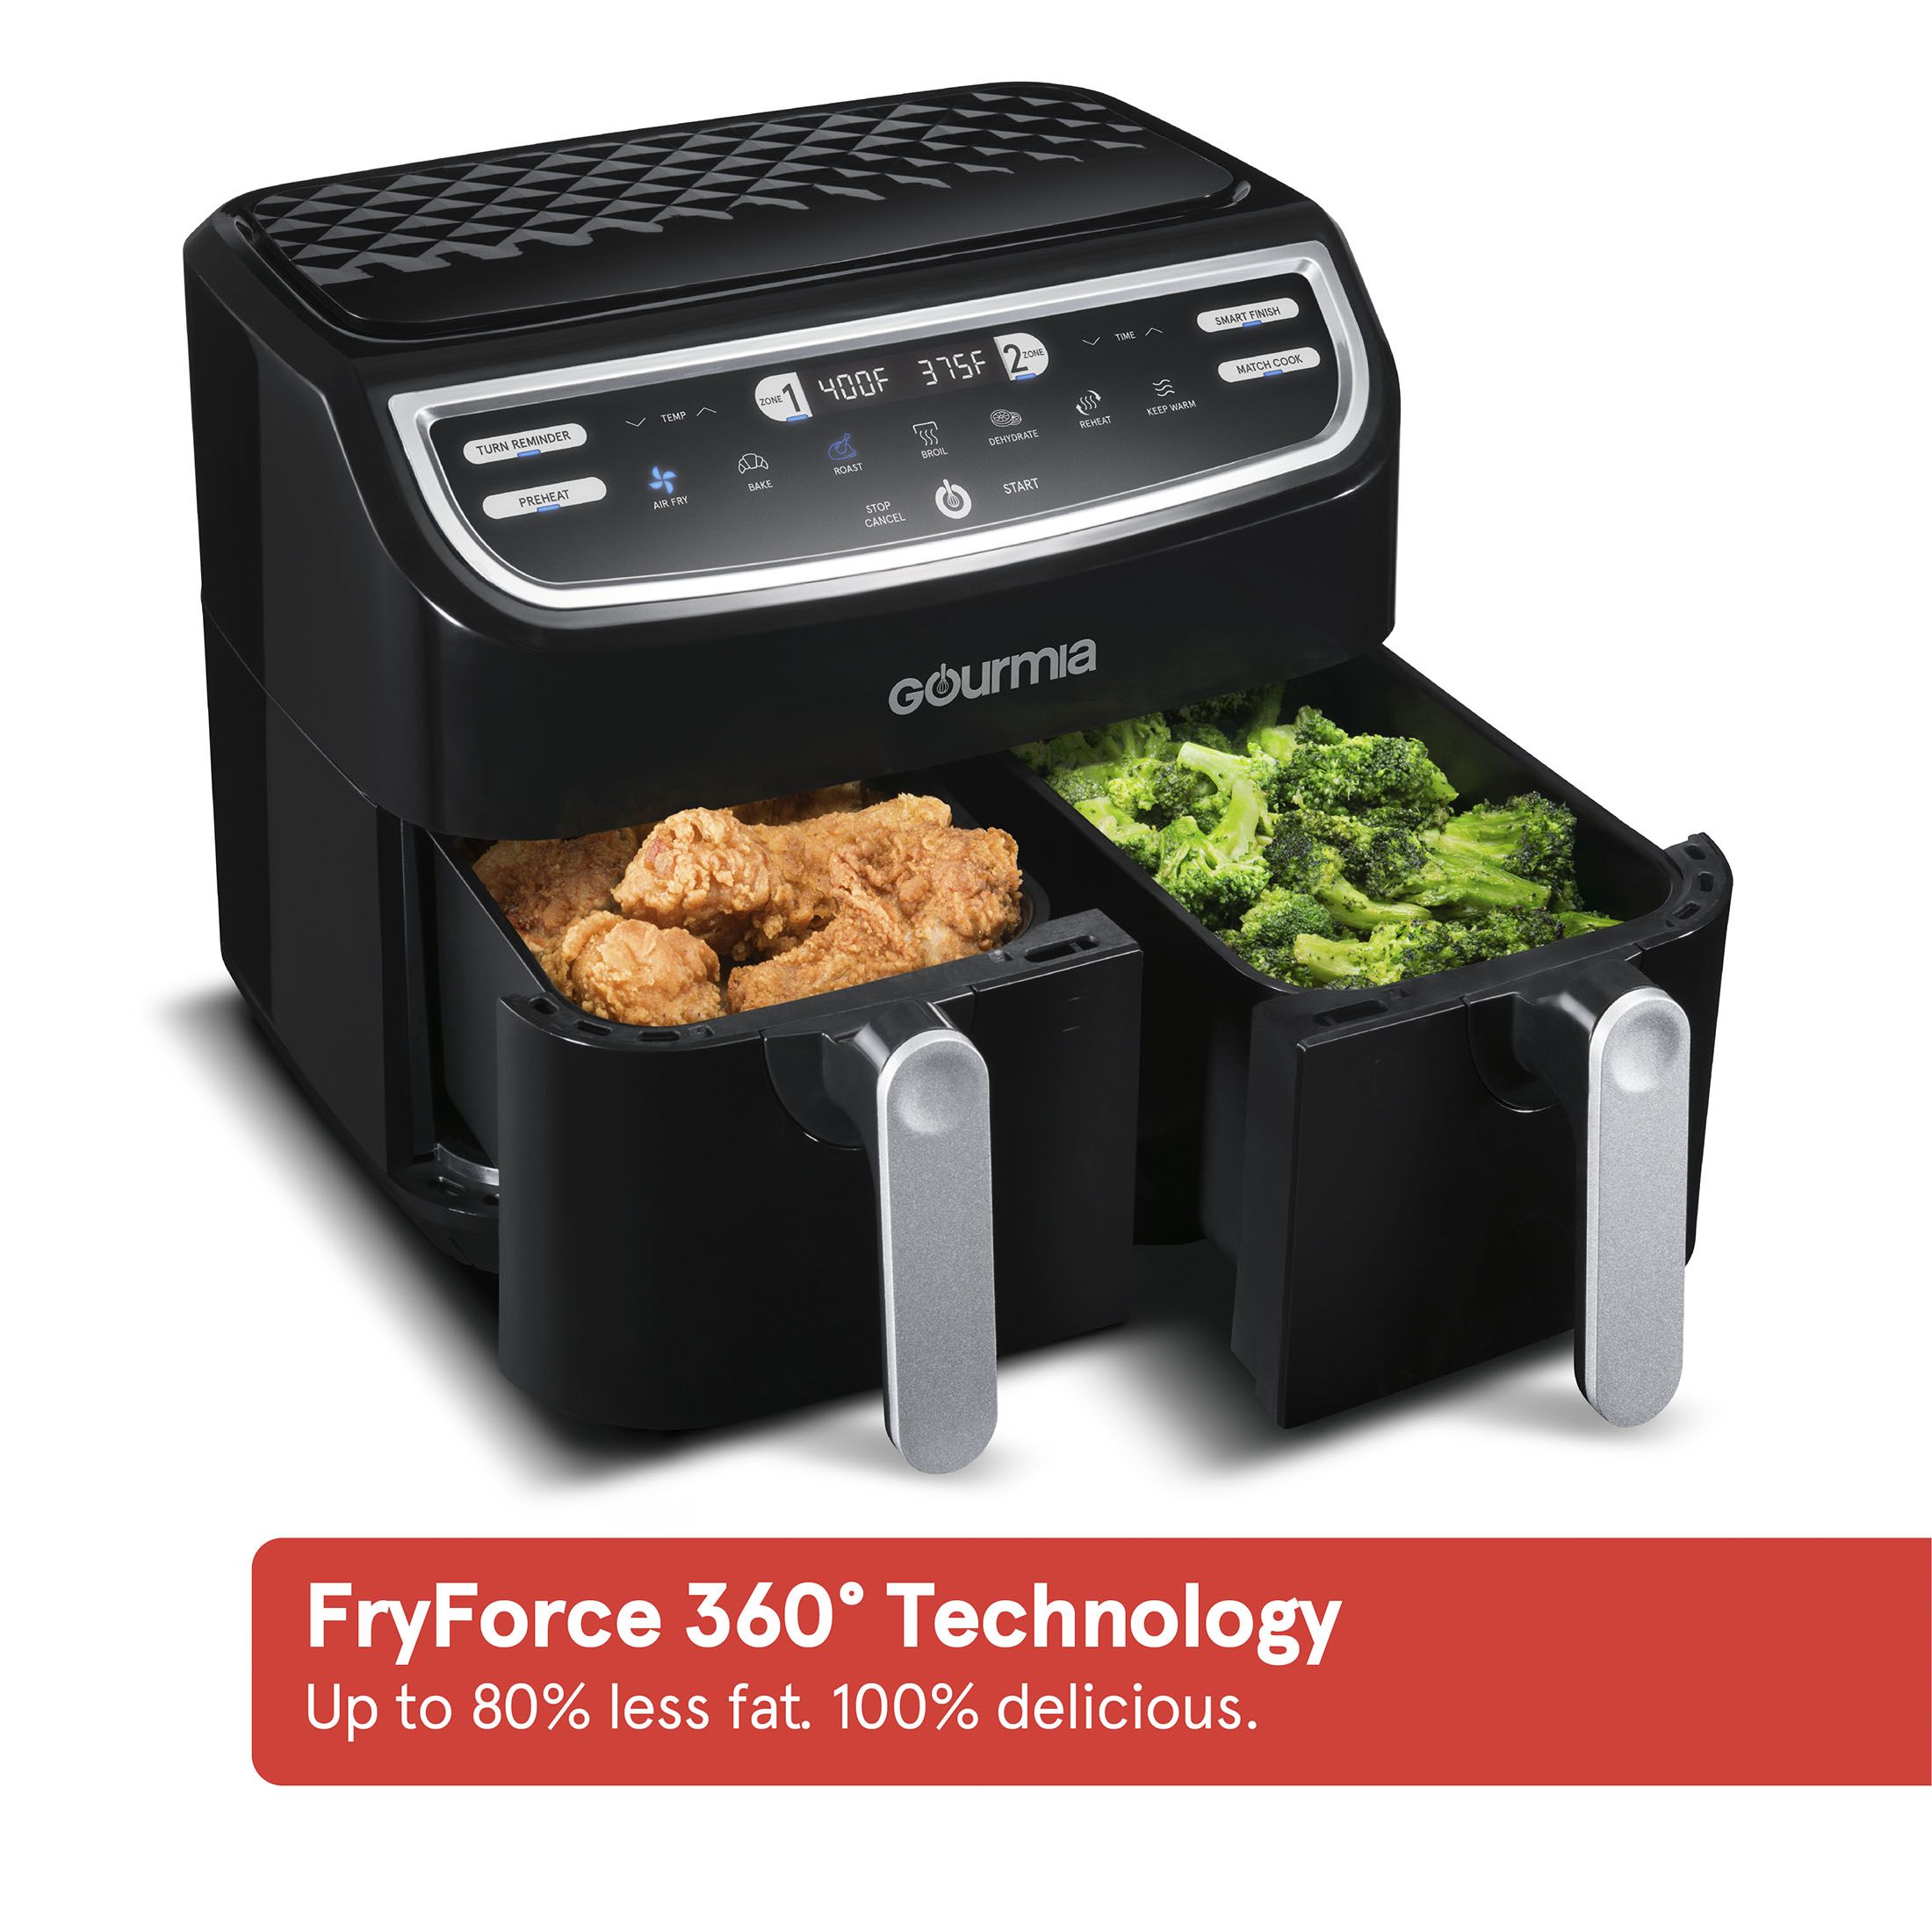 Gourmia 9 Qt 7-in-1 Dual Basket Digital Air Fryer with Smart Finish, BLK, 12.598 H, New - image 8 of 14